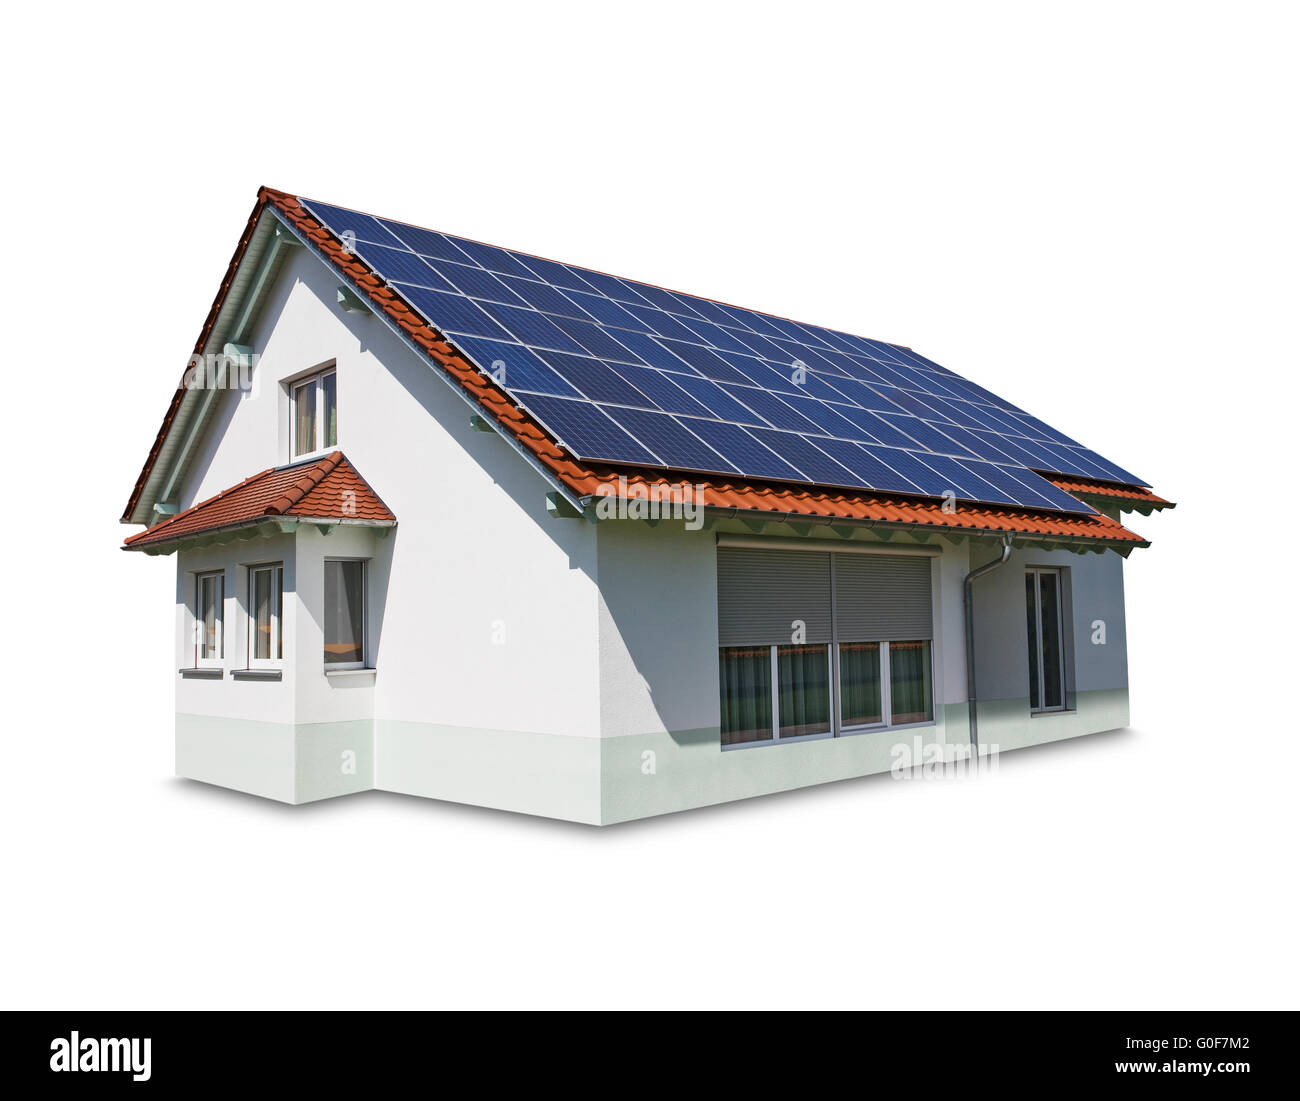 solar panels on the house roof Stock Photo